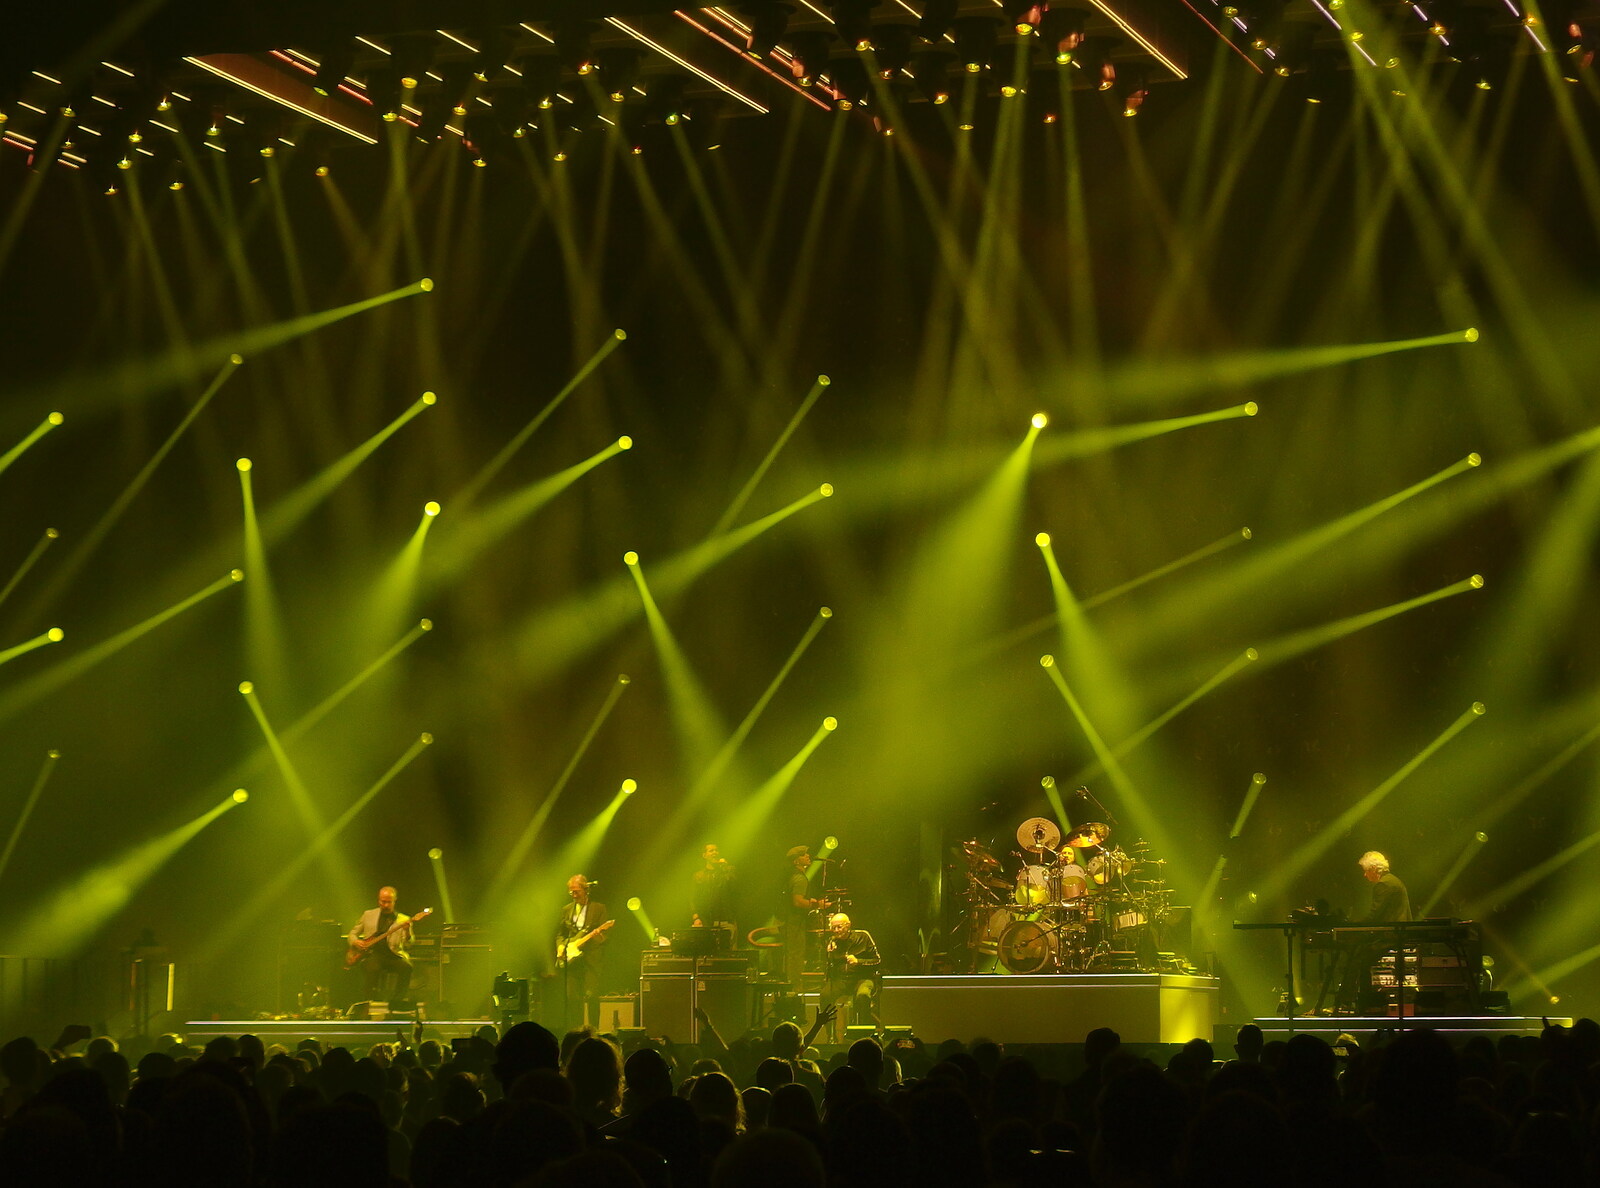 More insane lights from Genesis at the O2, North Greenwich, London - 24th March 2022